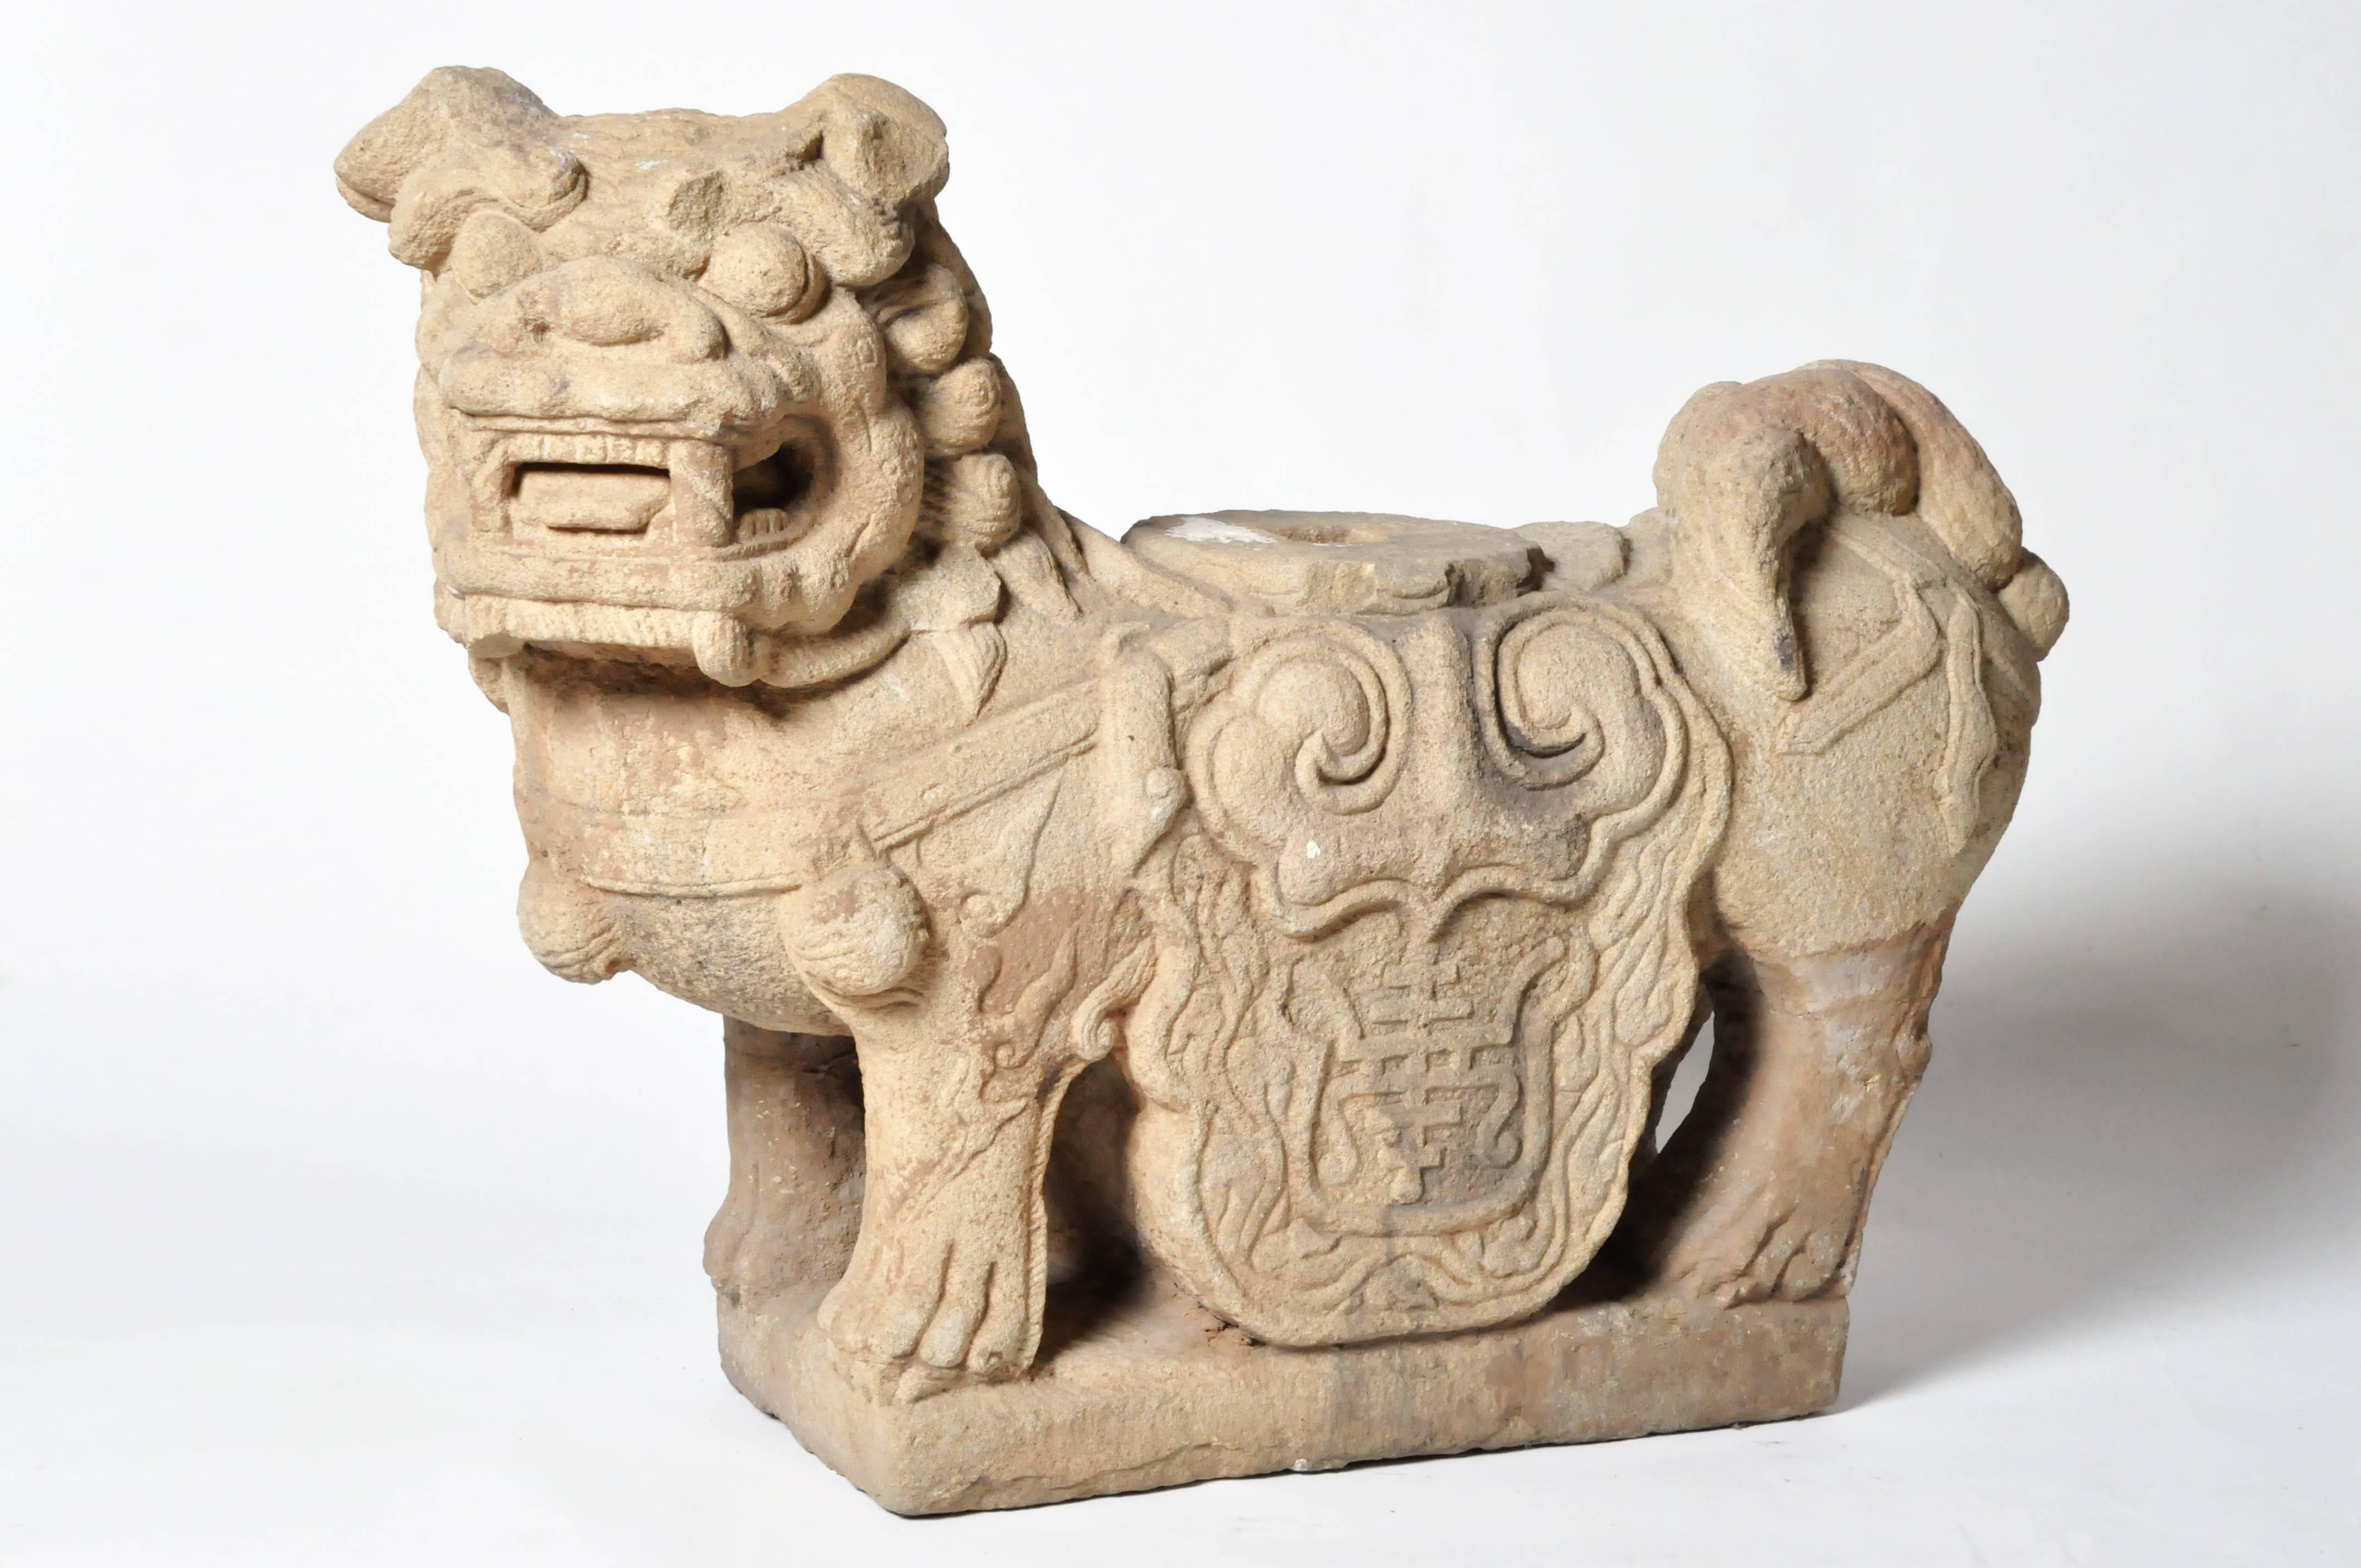 Often referred to as “Fu Dogs” in western culture, these handsome stone sentinels are iconic gatekeepers seen throughout China and elsewhere in Asia. Traditional symbols of protection, they are made from durable materials like bronze or stone and